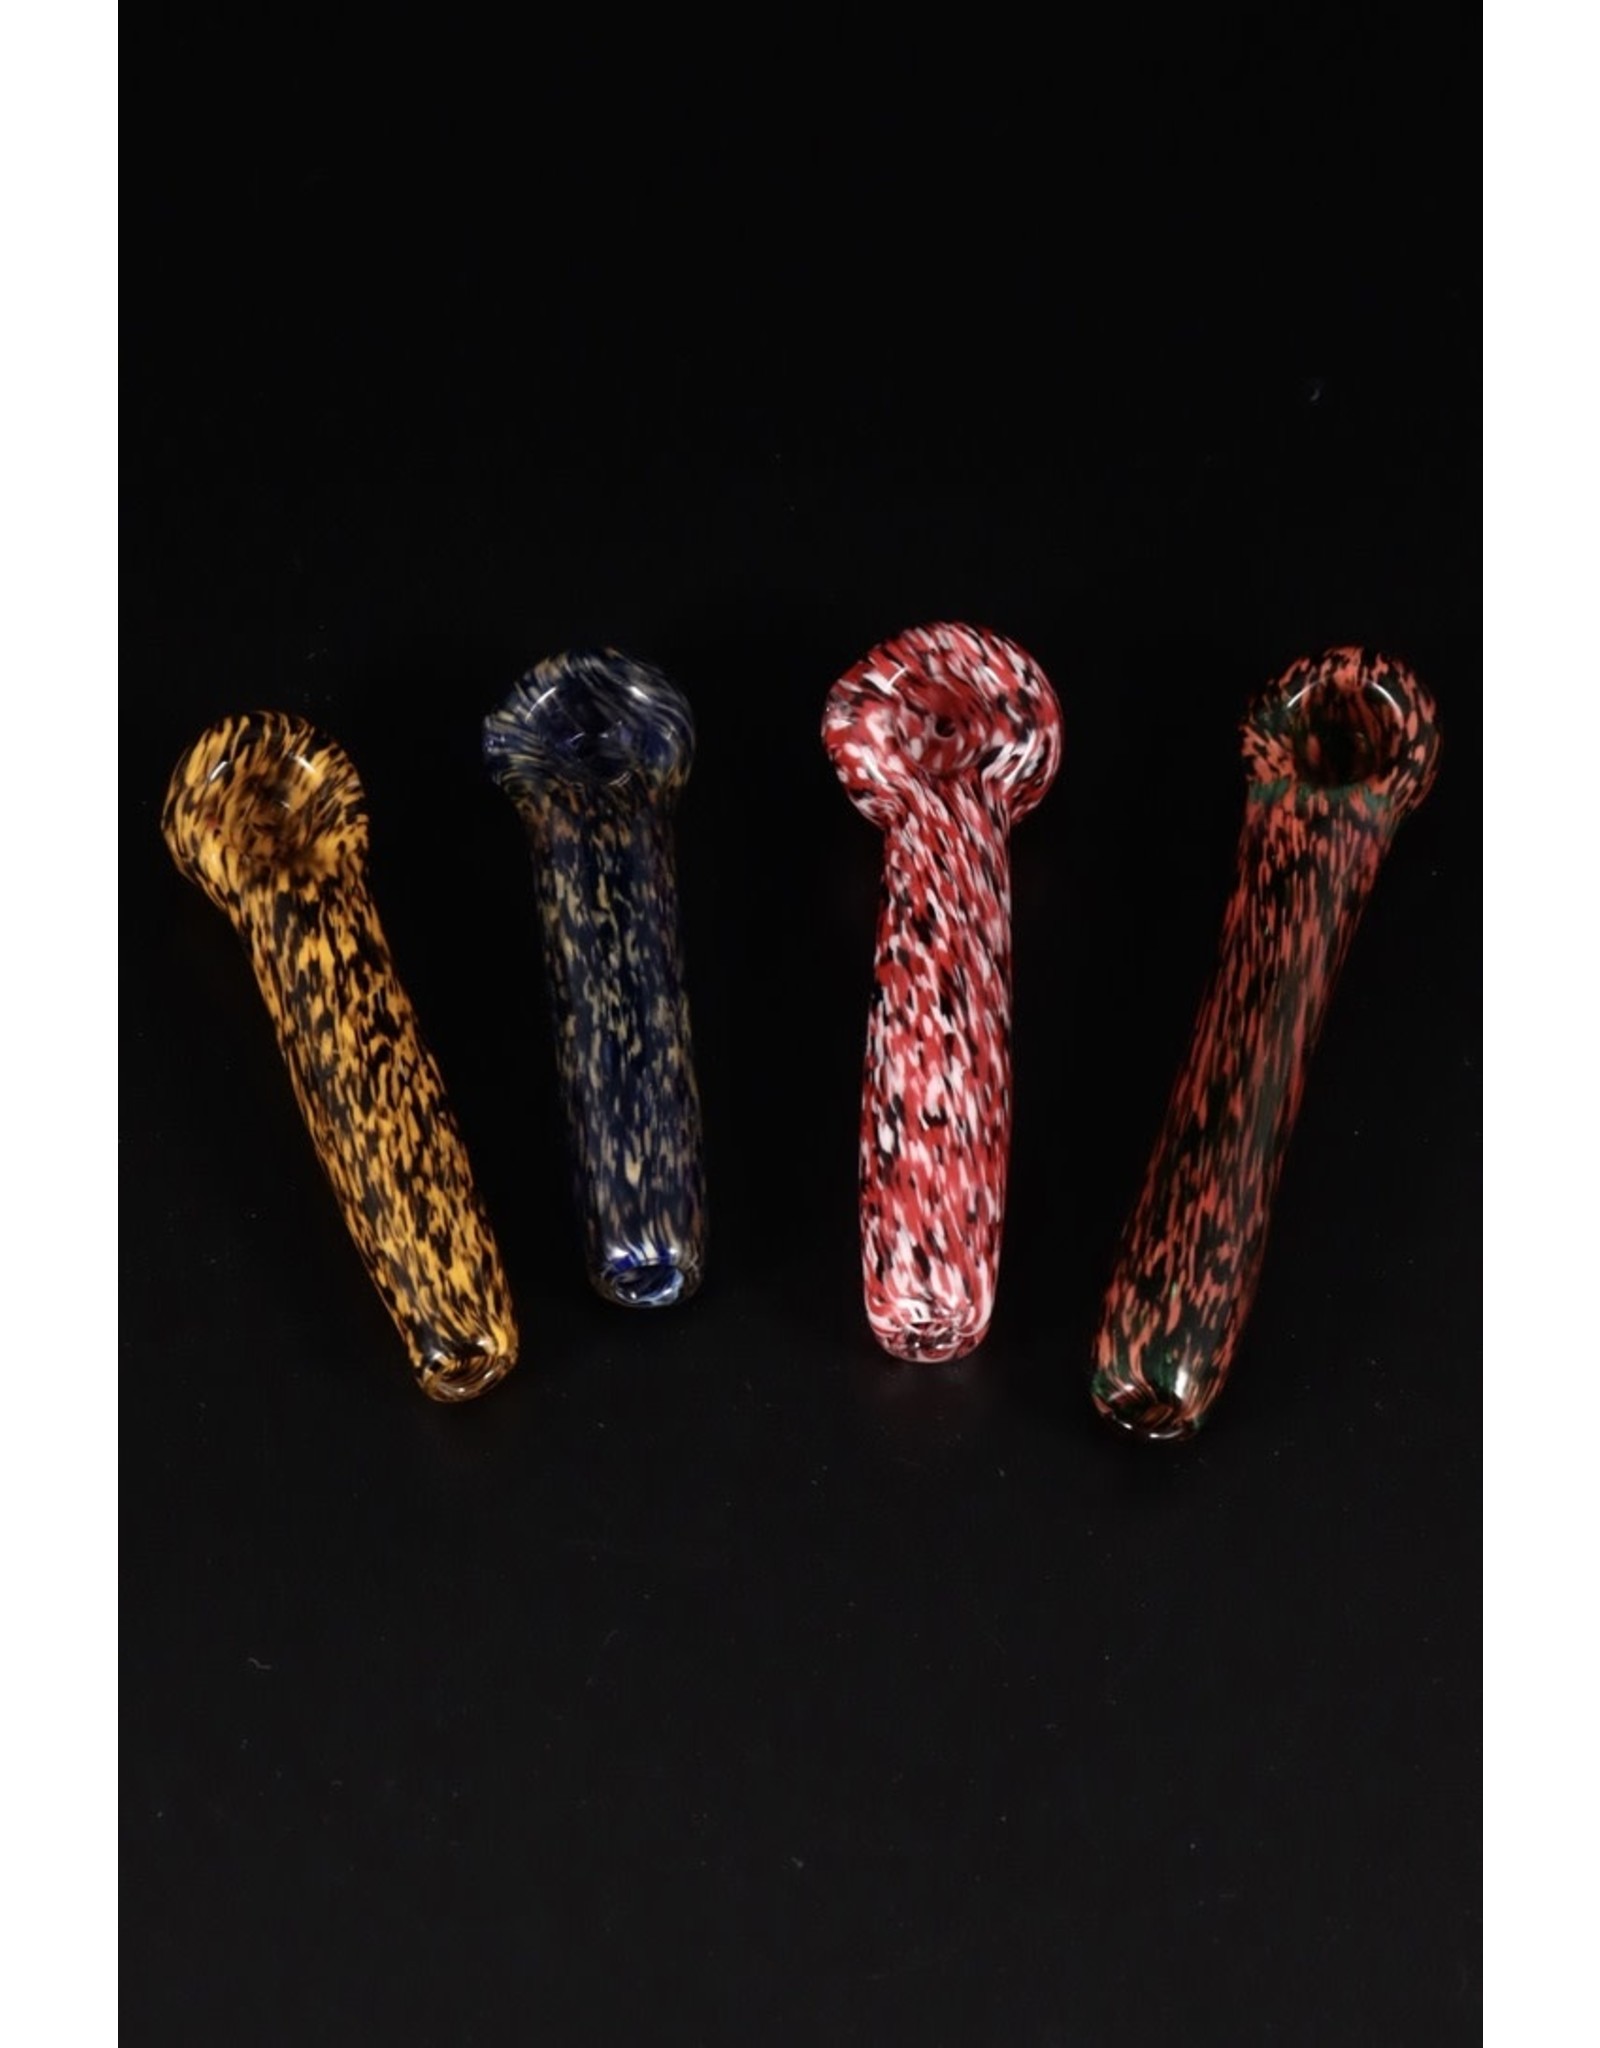 oHIo Valley Glass OVG Frit Mini Hand Pipe